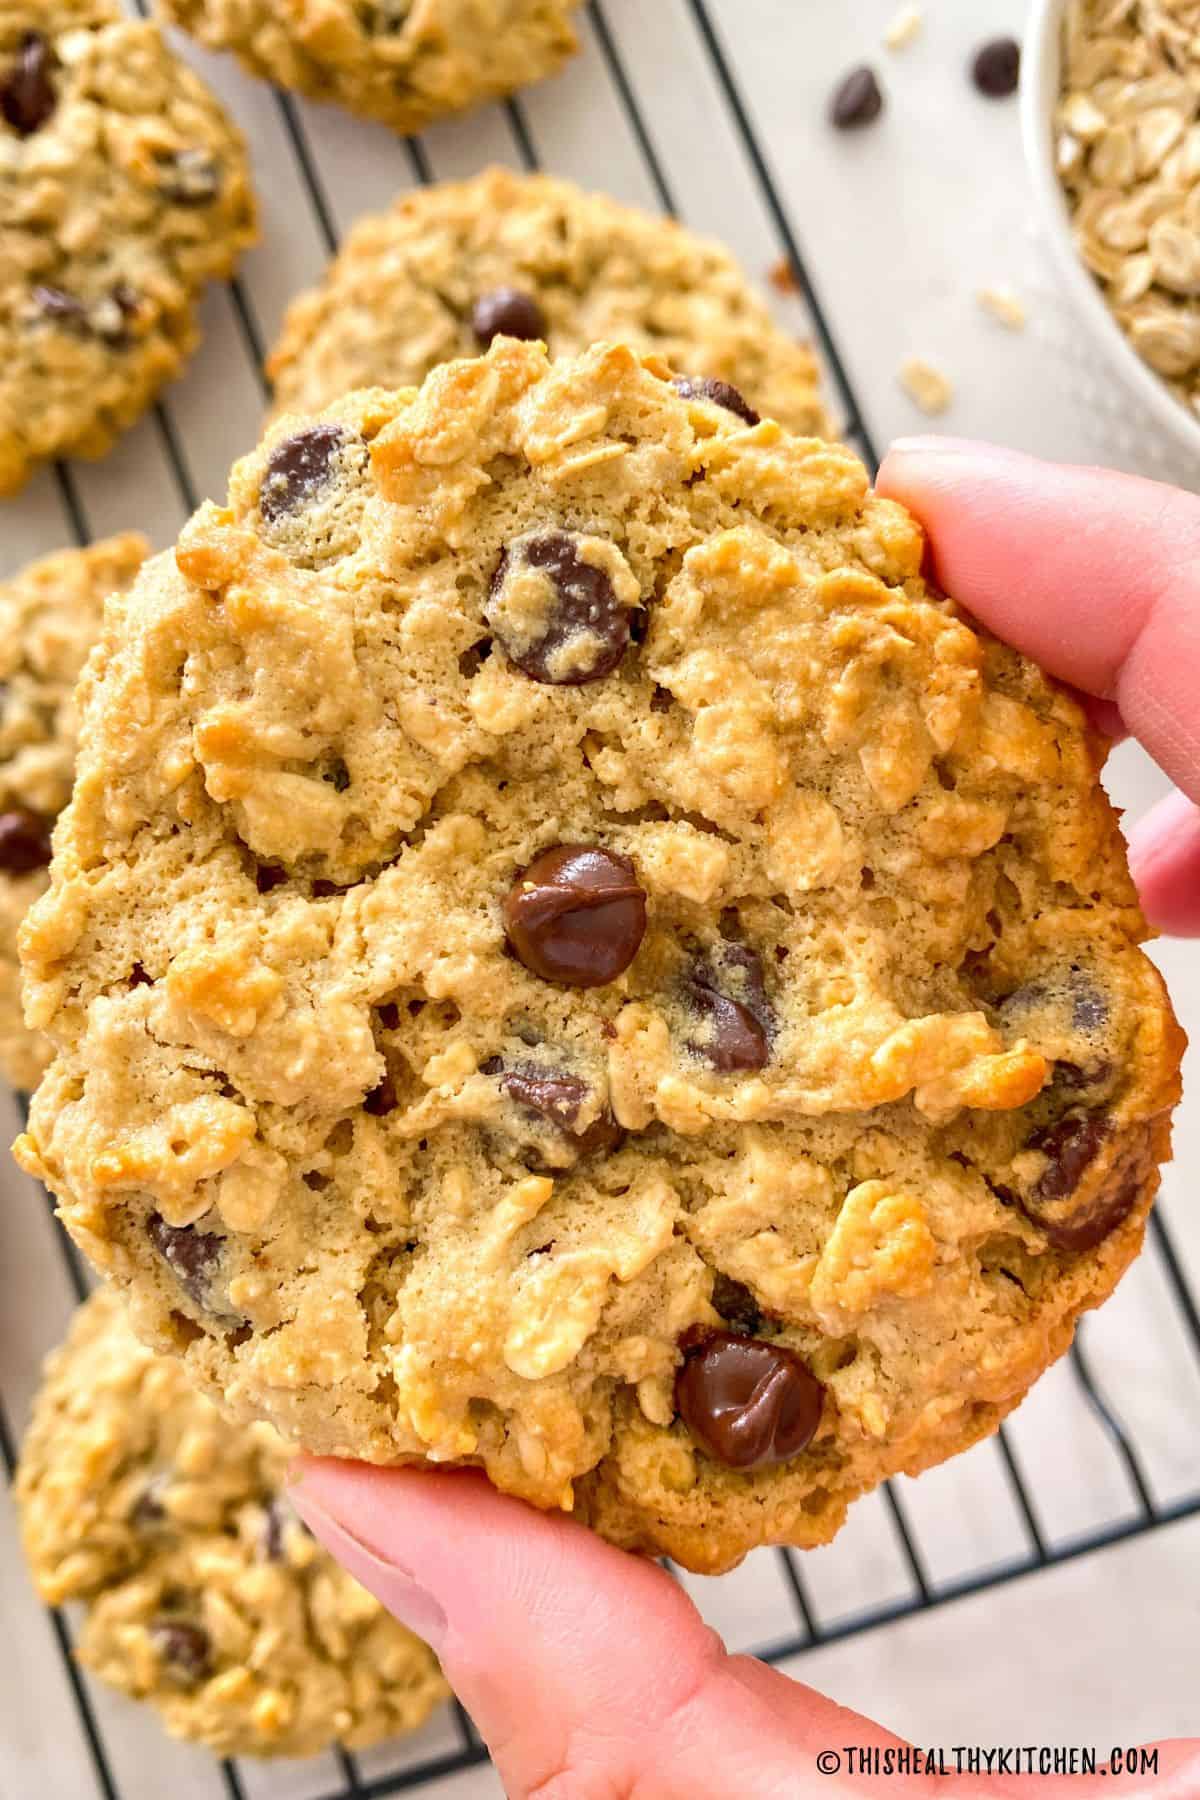 Hand holding up chocolate chip oatmeal cookie.